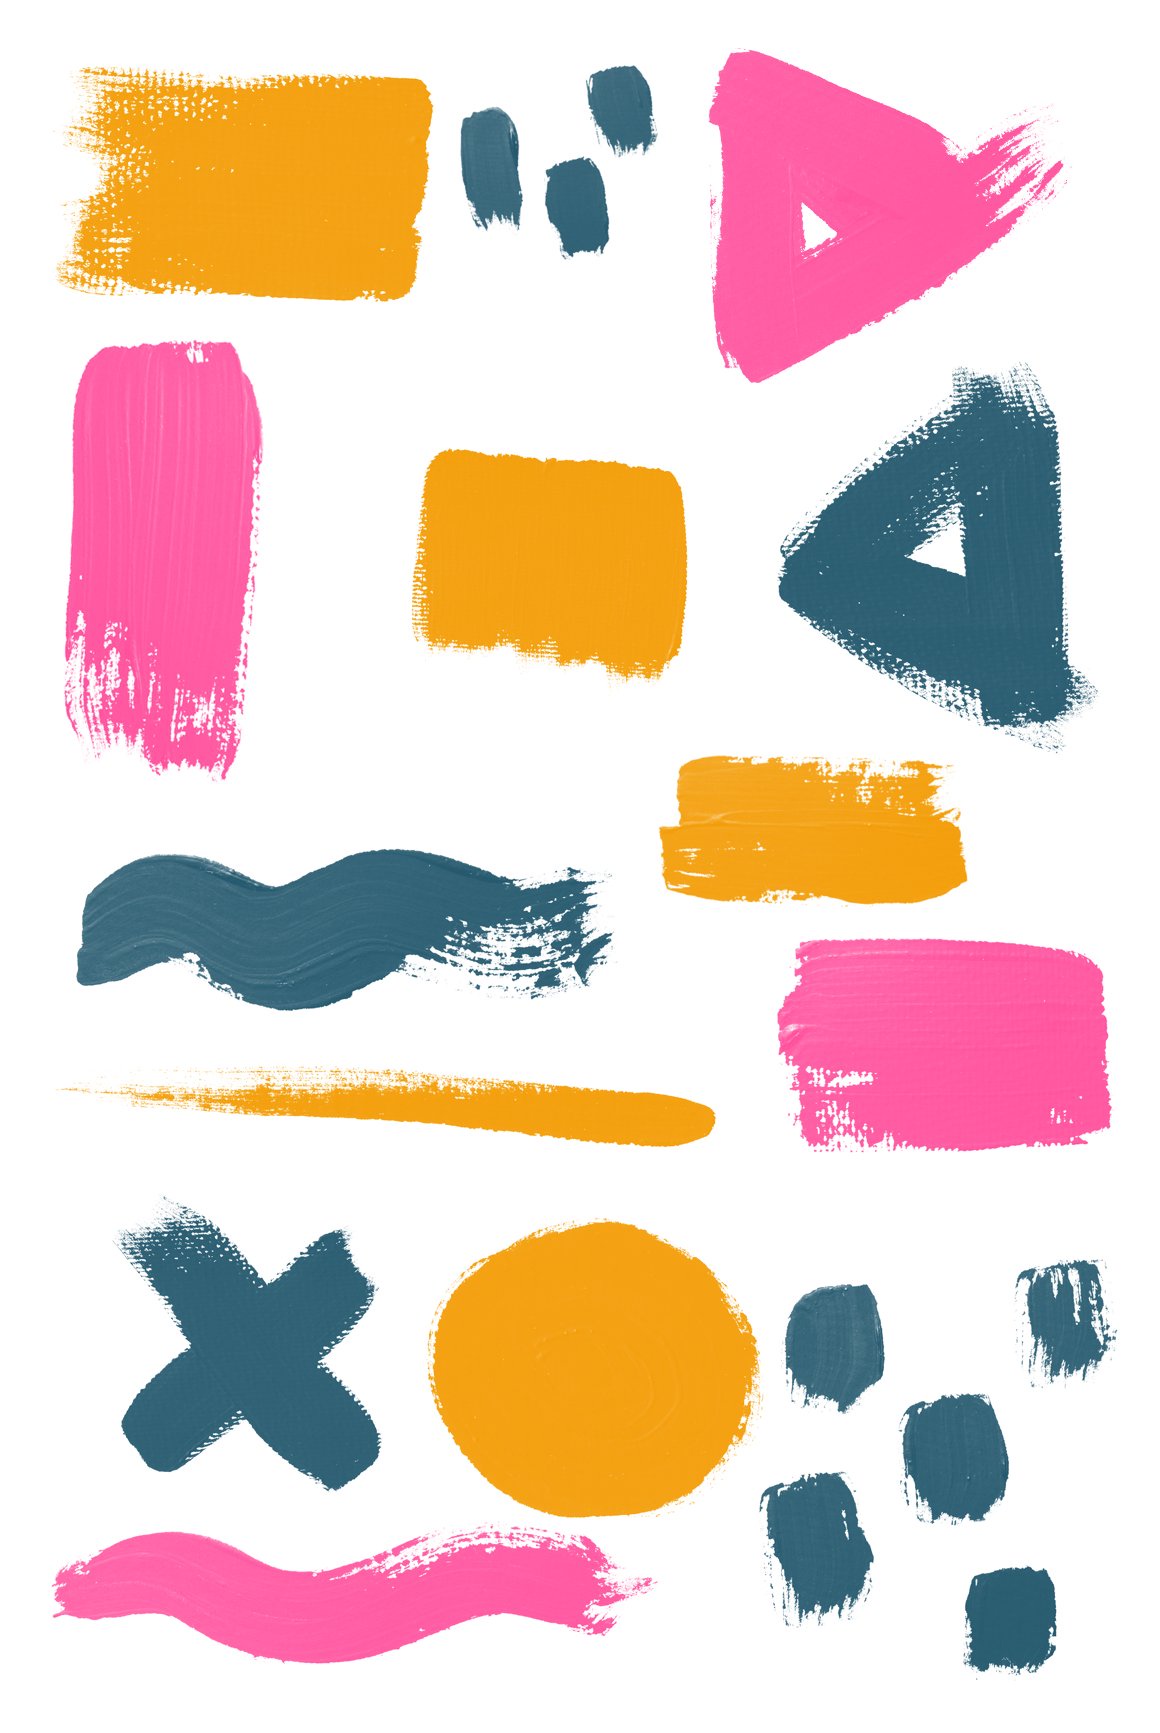 Brush_Set_for_Procreate_-_Dao_Trong_Le